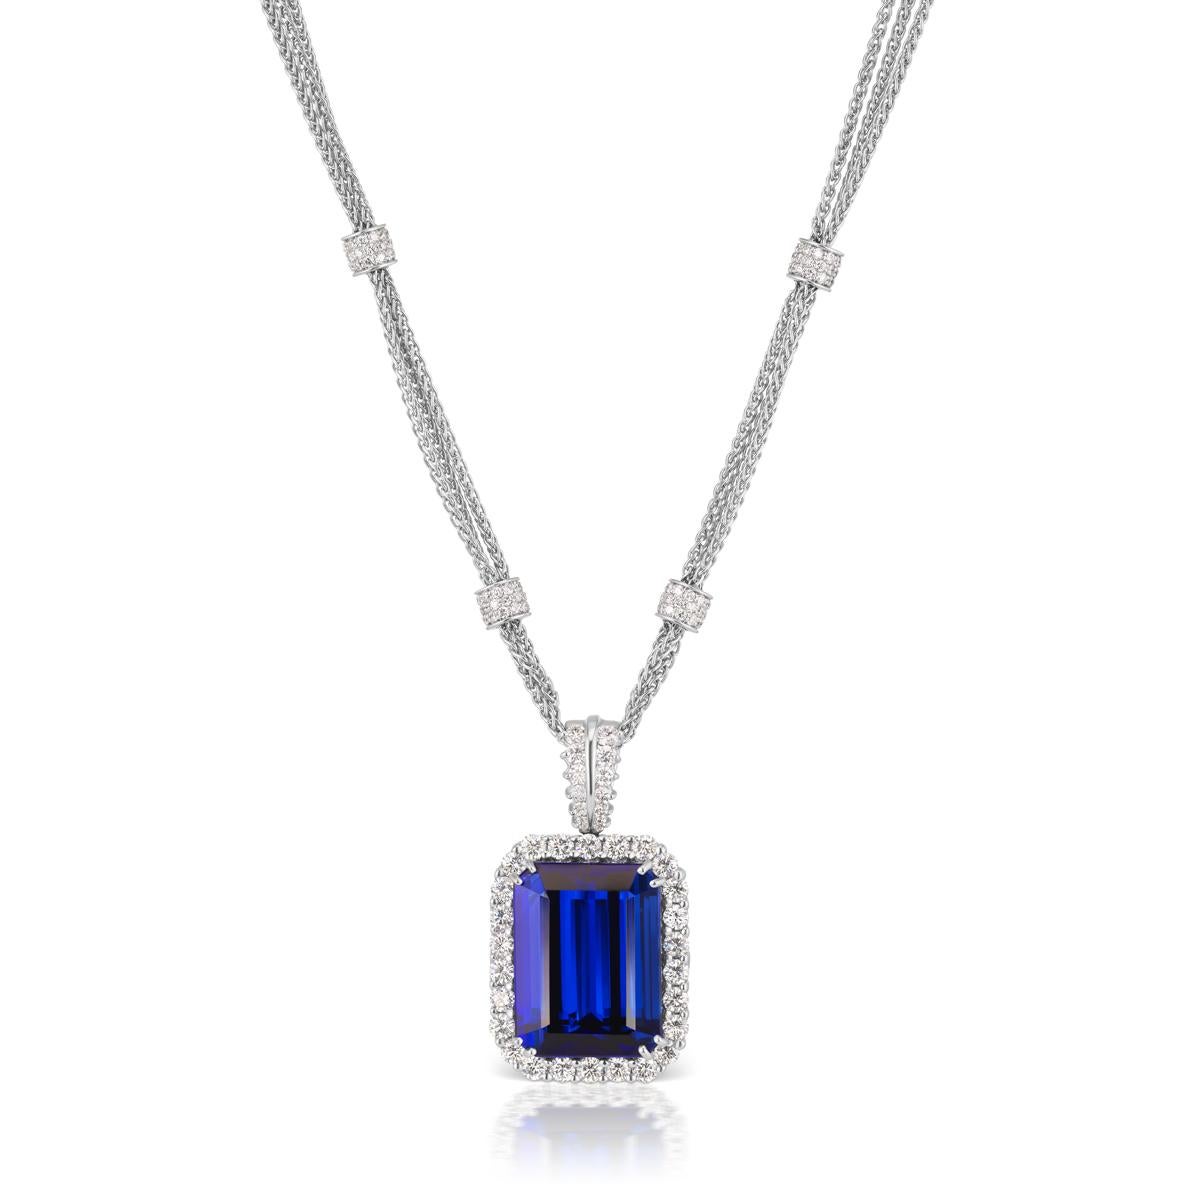 A substantial gold chain with diamond stations provides the perfect backdrop for a classic Tanzanite pendant.
Item:	# 01336
Setting:	18K W
Color Weight:	43.25 ct. of Tanzanite
Diamond Weight:	6 ct. of Diamonds
